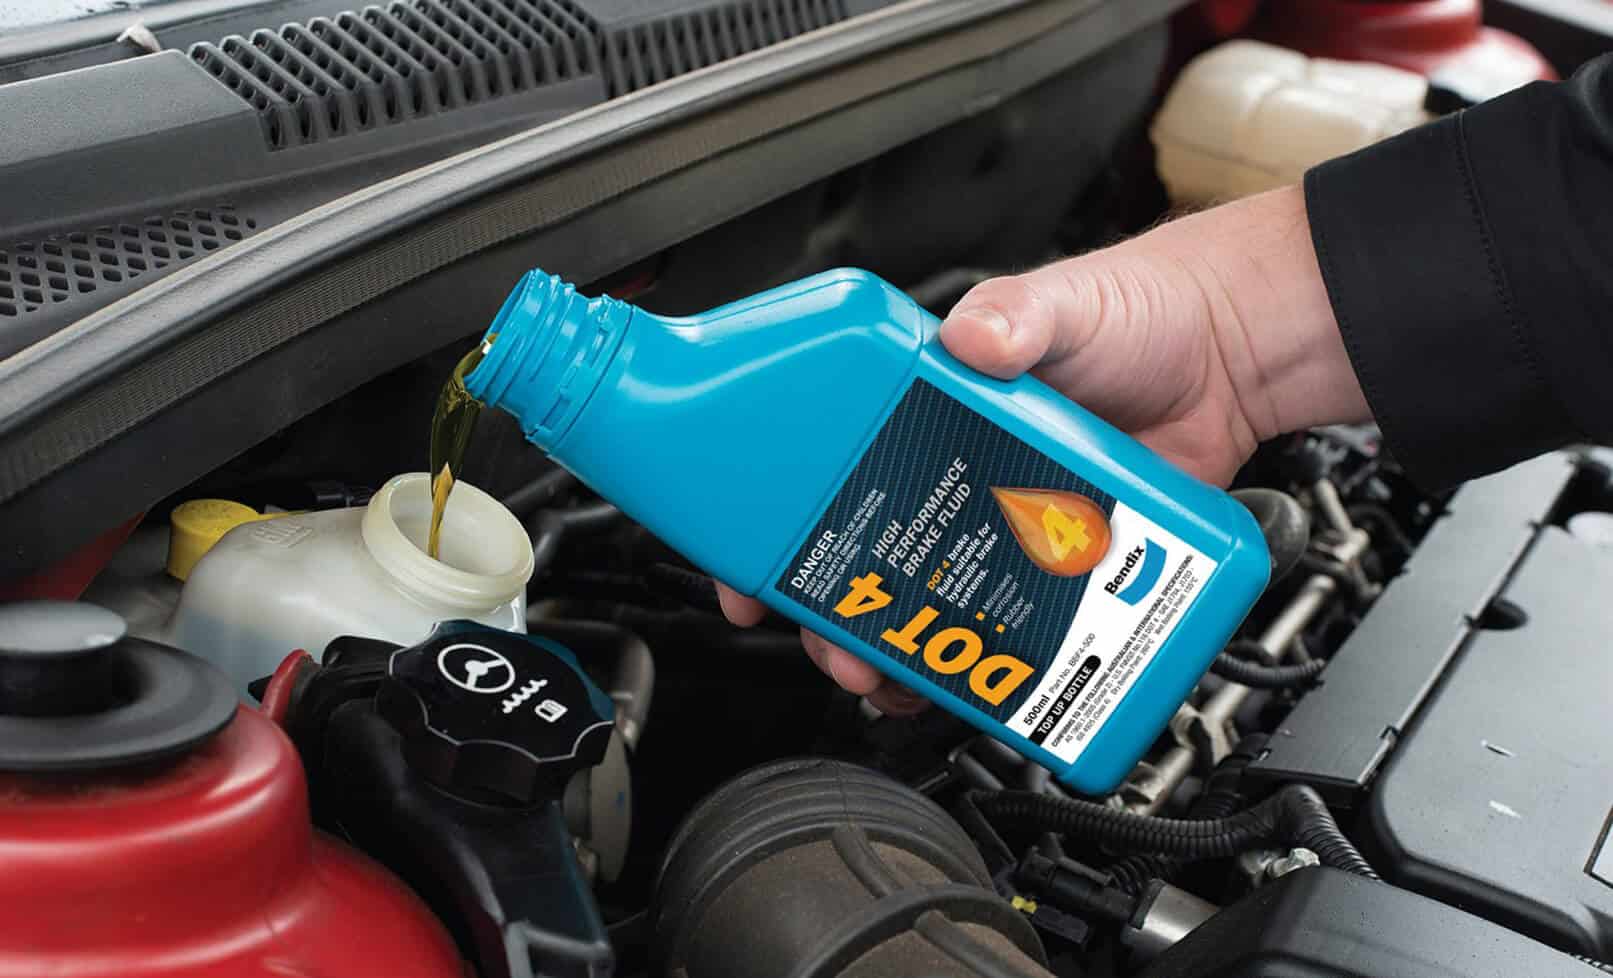 Don't Ignore These 4 Telltale Signs Time to Change Your Brake Fluid!